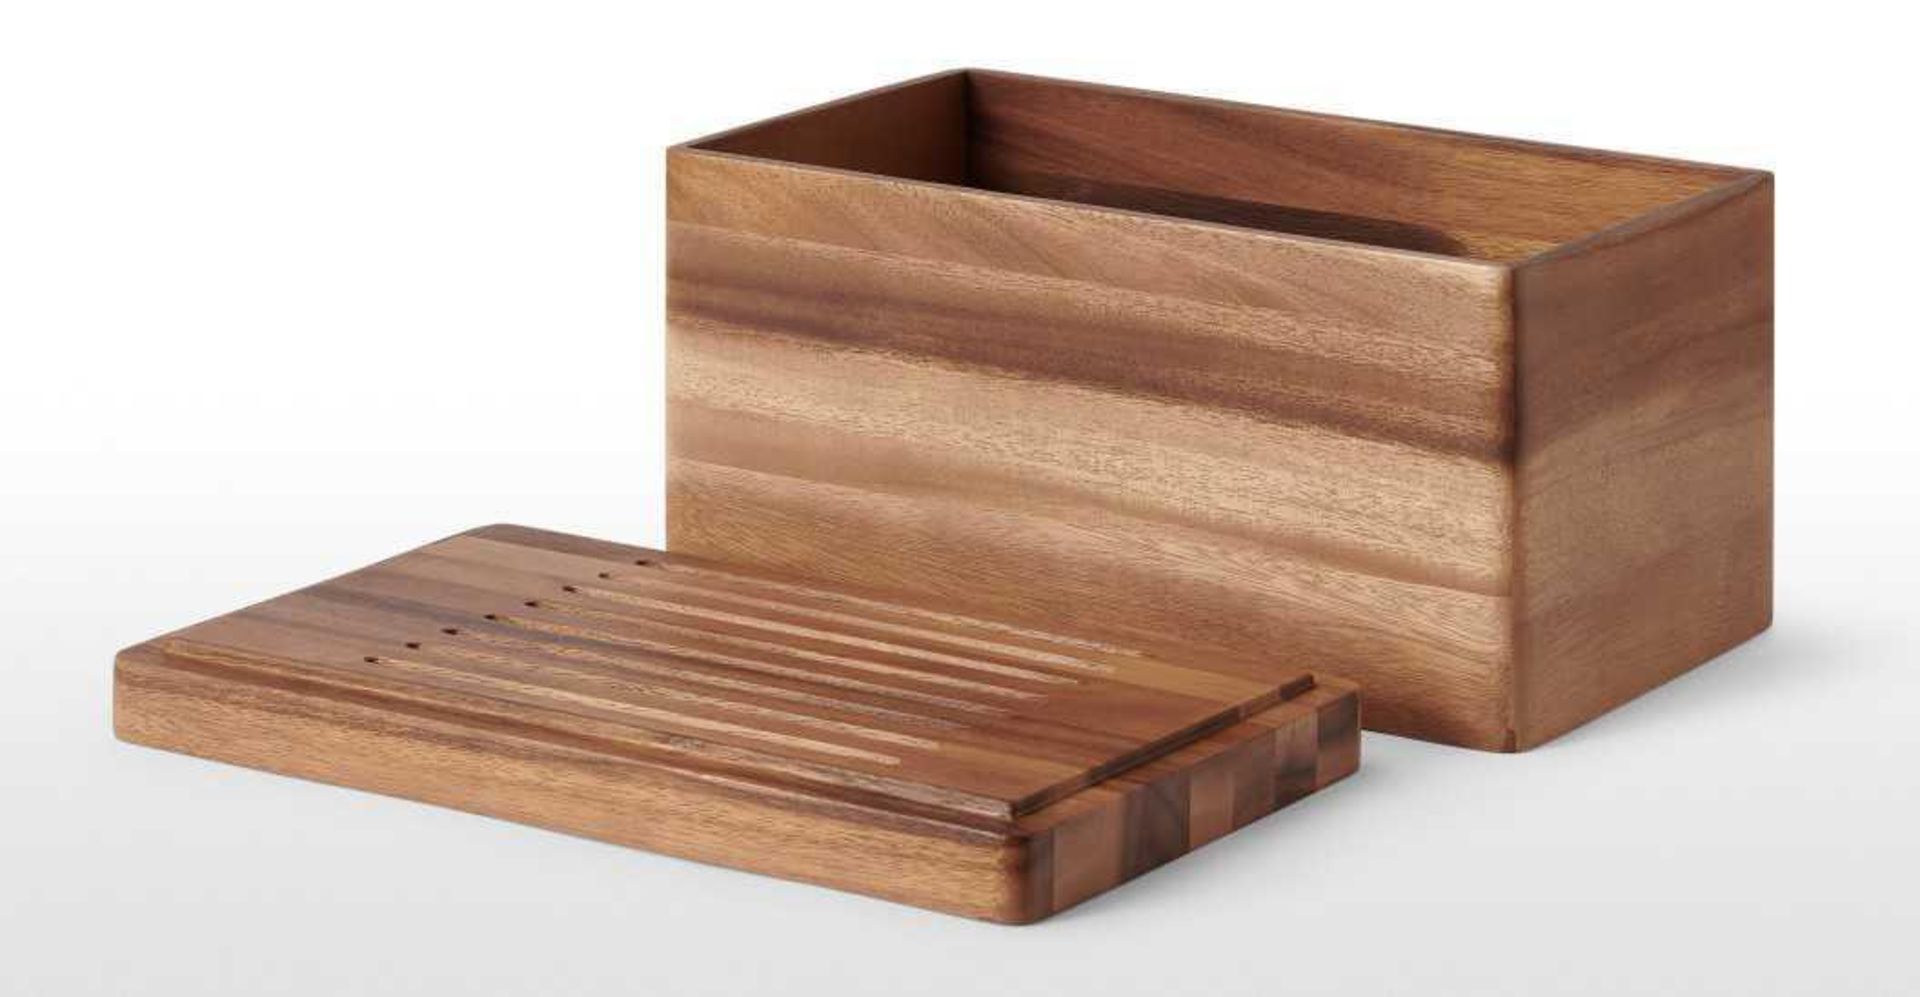 Rrp £40 Each Assorted Kitchen Items To Include A Boxed Made Acacia Clover Wood Bread Bin In Natural